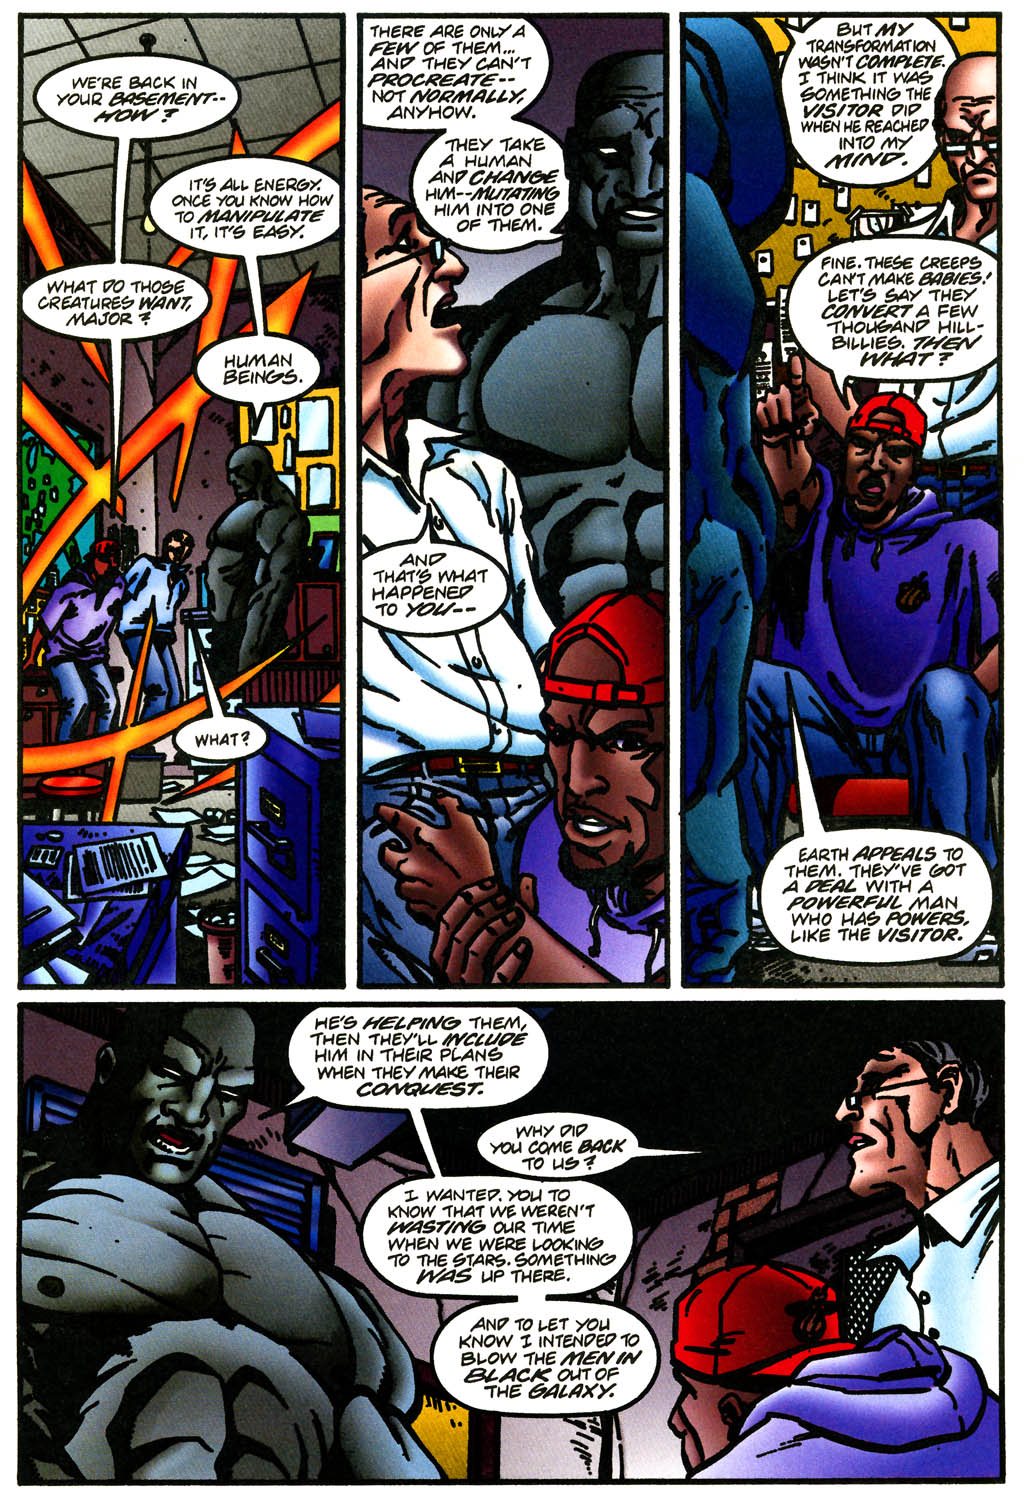 The Visitor 13 Page 10